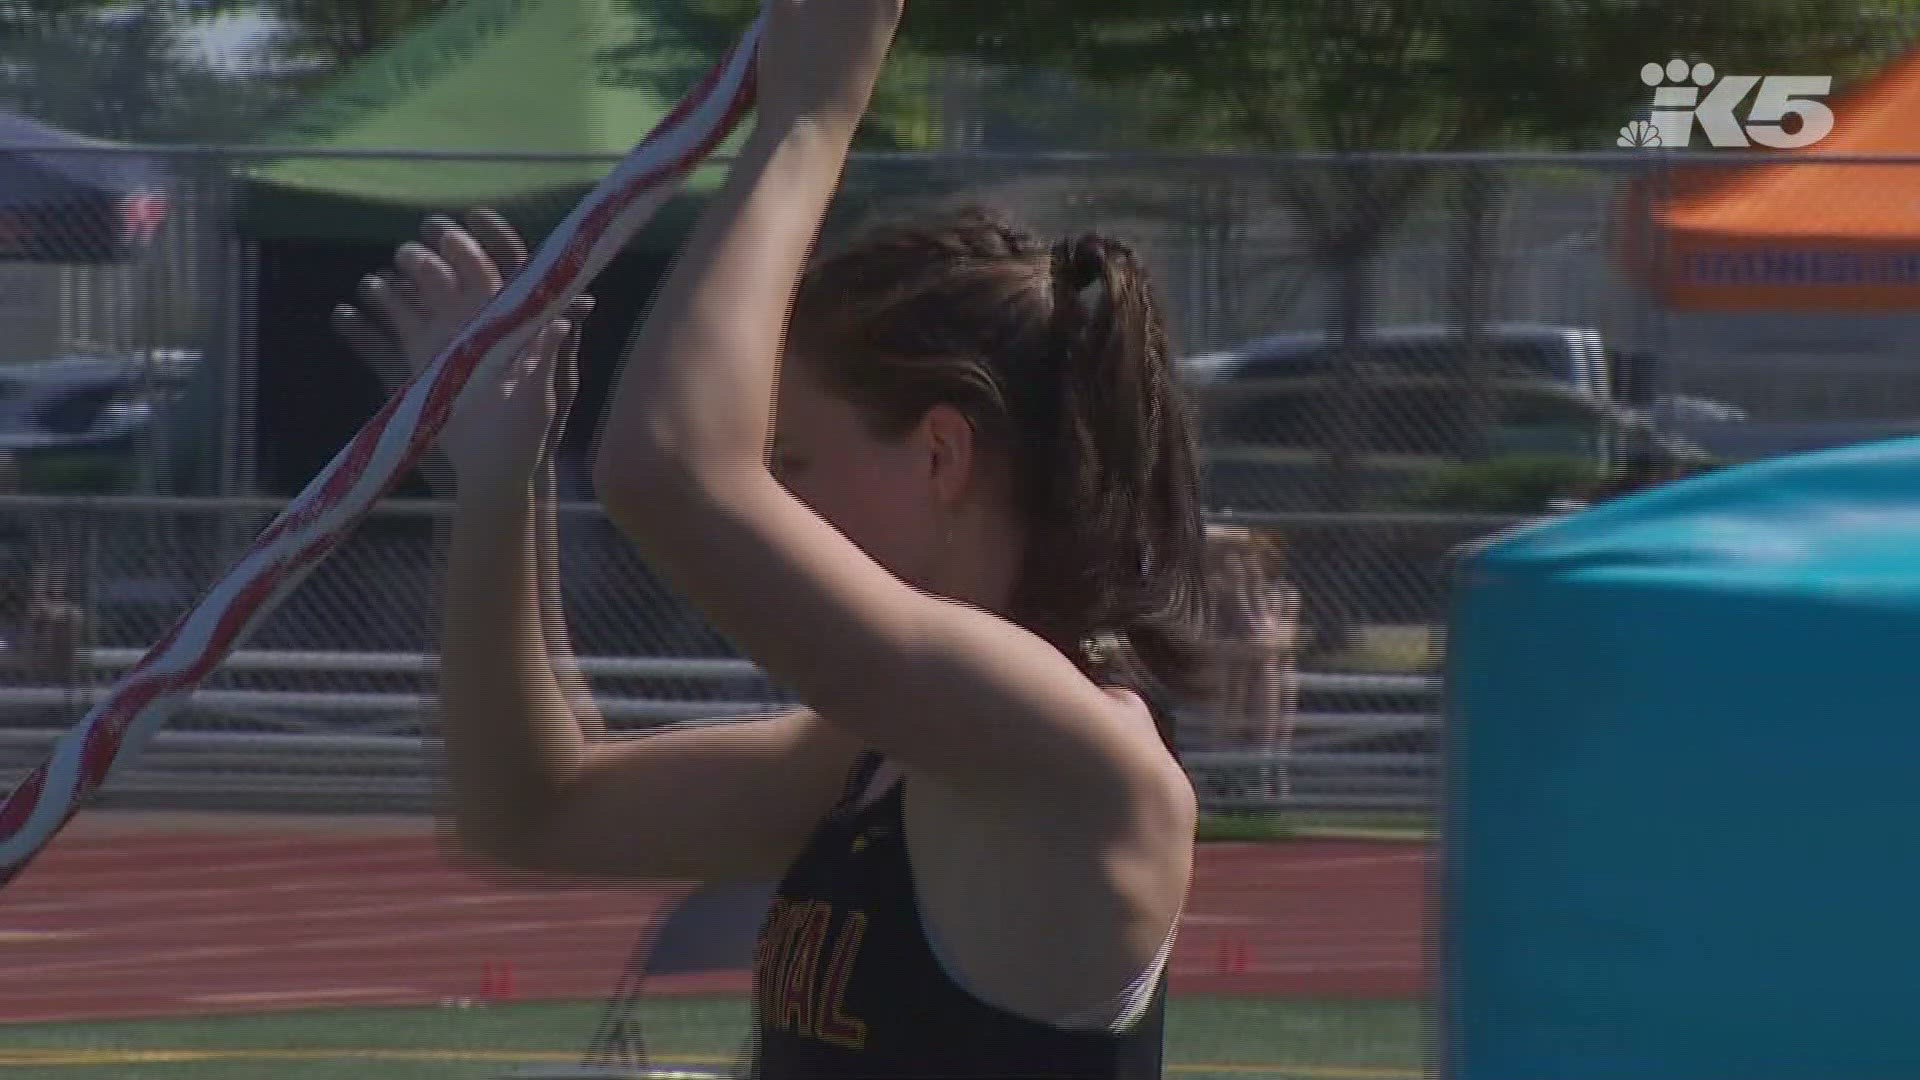 Capital's Hana Moll wins the 3A State Pole Vault title with a jump of 14 feet, 7 inches